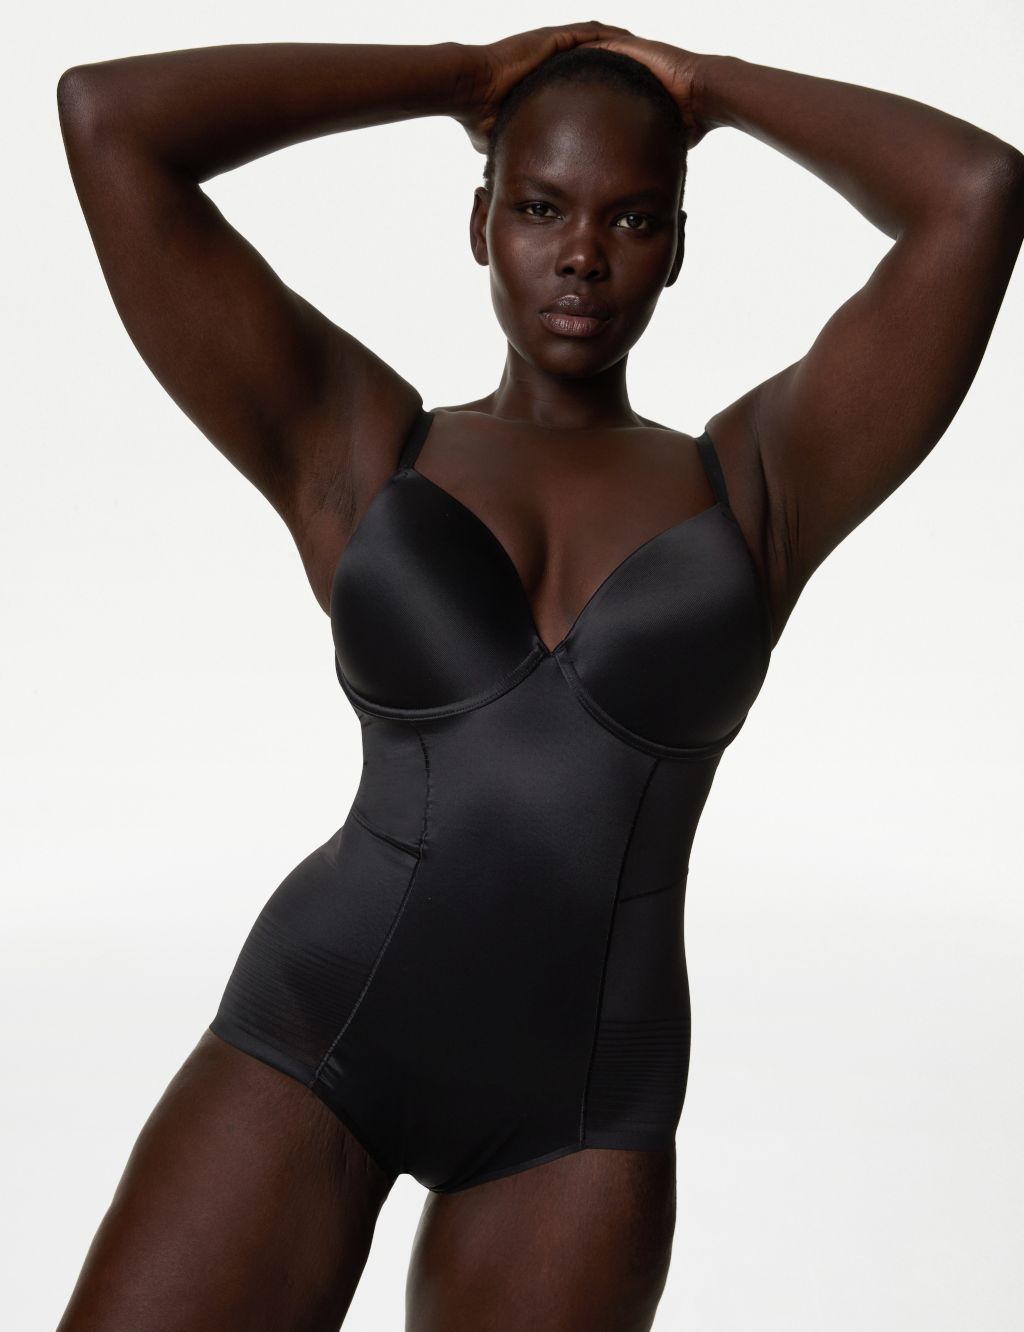 BODIED BODY SUIT - XS/SMALL / Chocolate